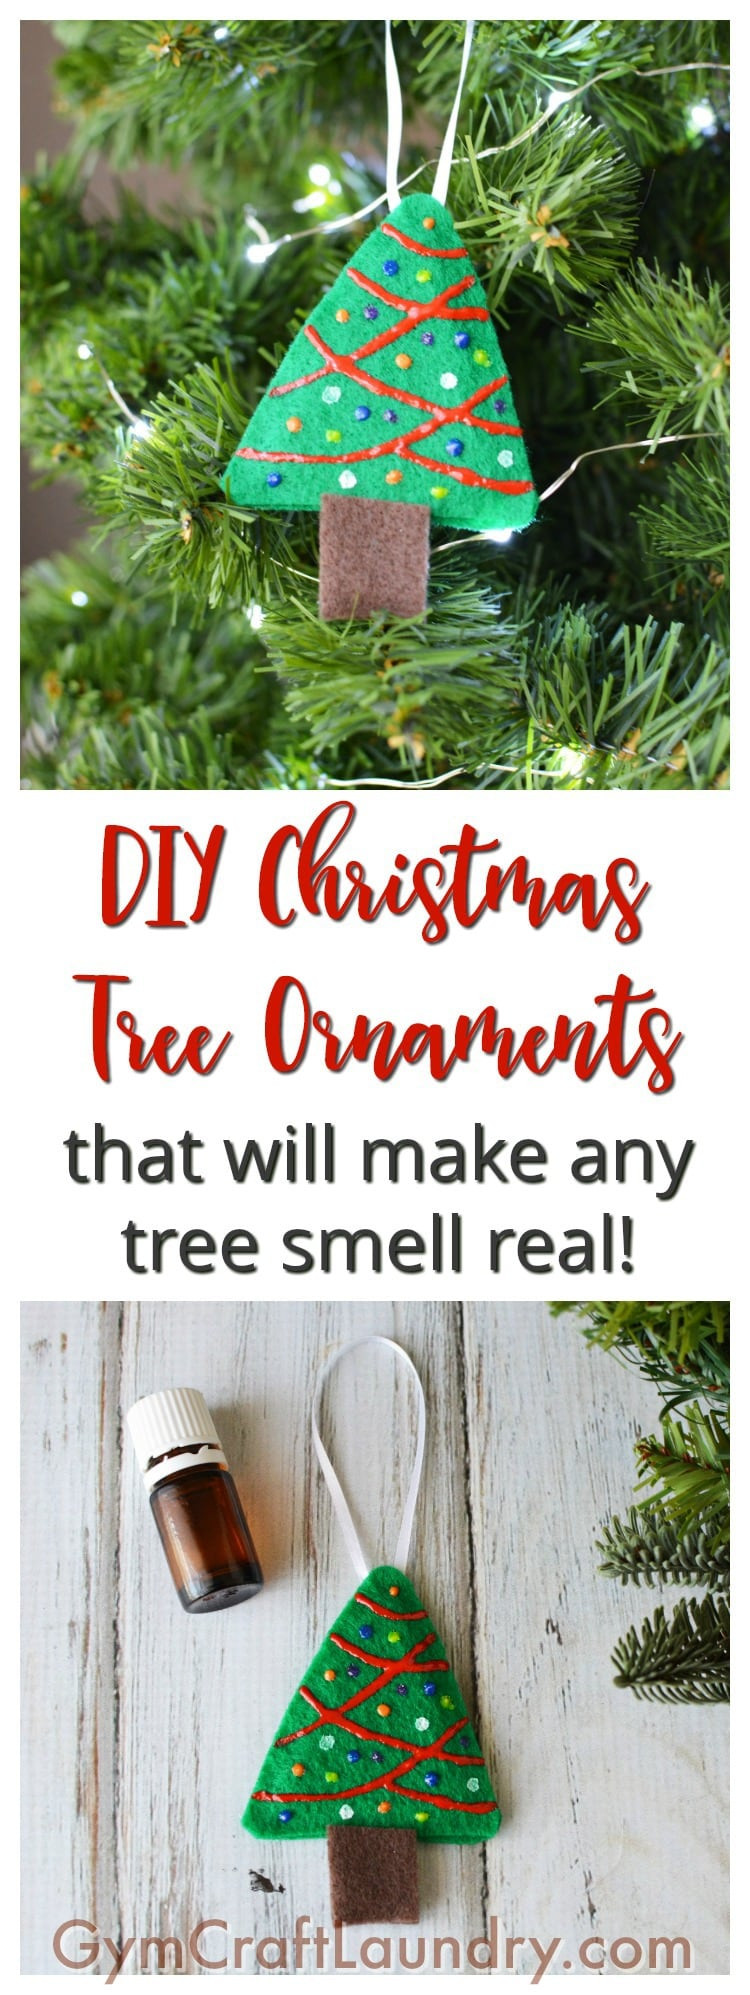 DIY Christmas Tree Decorations
 DIY scented Christmas tree ornaments Gym Craft Laundry